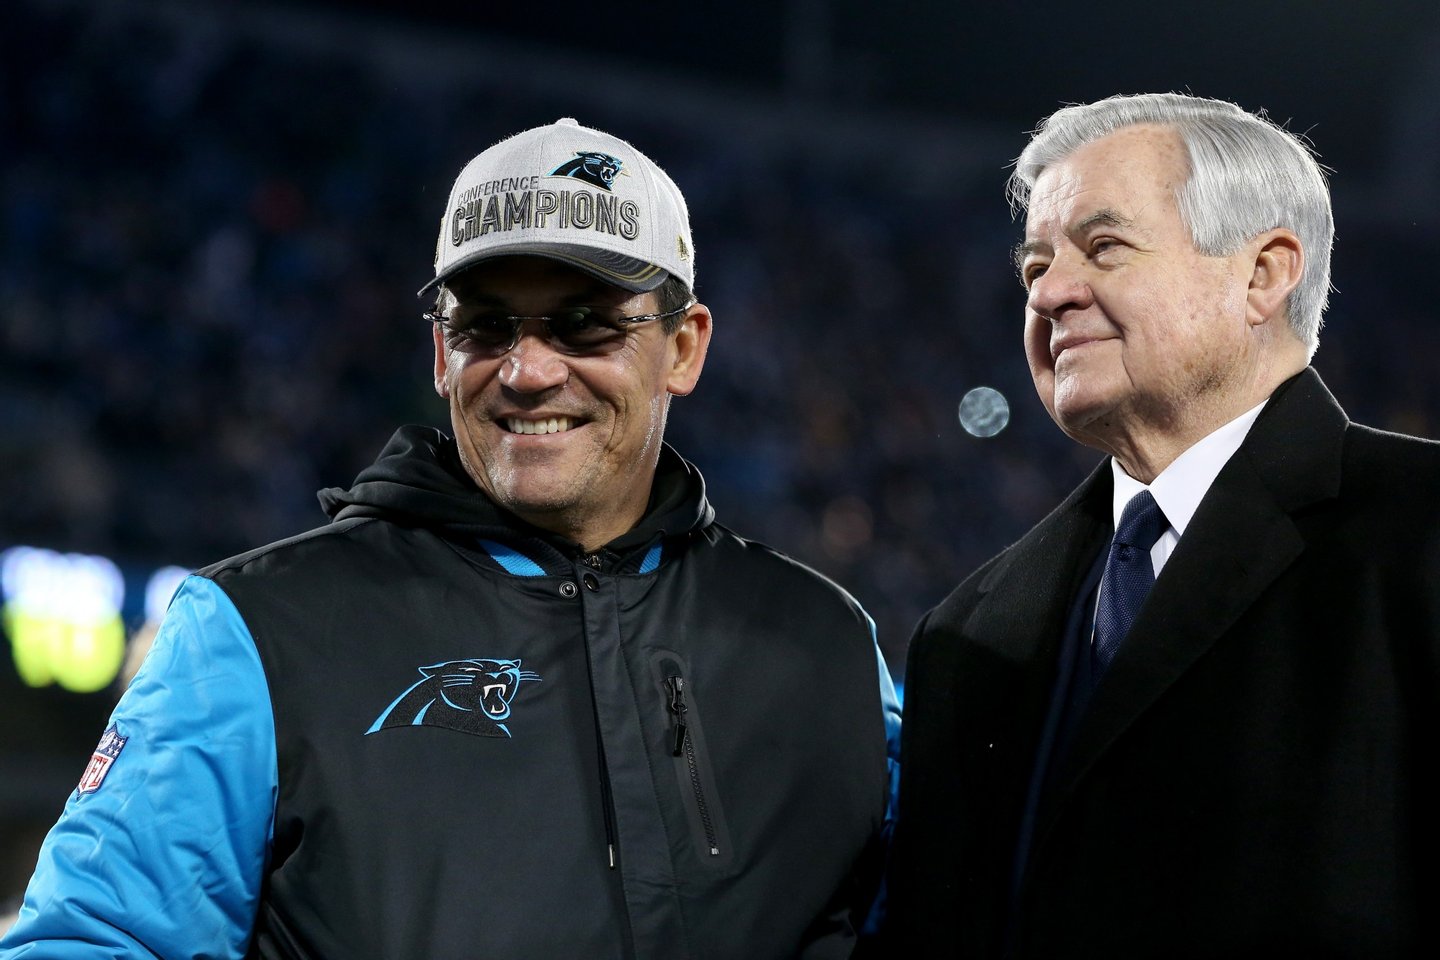 CHARLOTTE, NC - JANUARY 24: (L-R) Head coach Ron Rivera and owner Jerry Richardson of the Carolina Panthers smile after defeating the Arizona Cardinals with a score of 49 to 15 in the NFC Championship Game at Bank of America Stadium on January 24, 2016 in Charlotte, North Carolina. (Photo by Streeter Lecka/Getty Images)